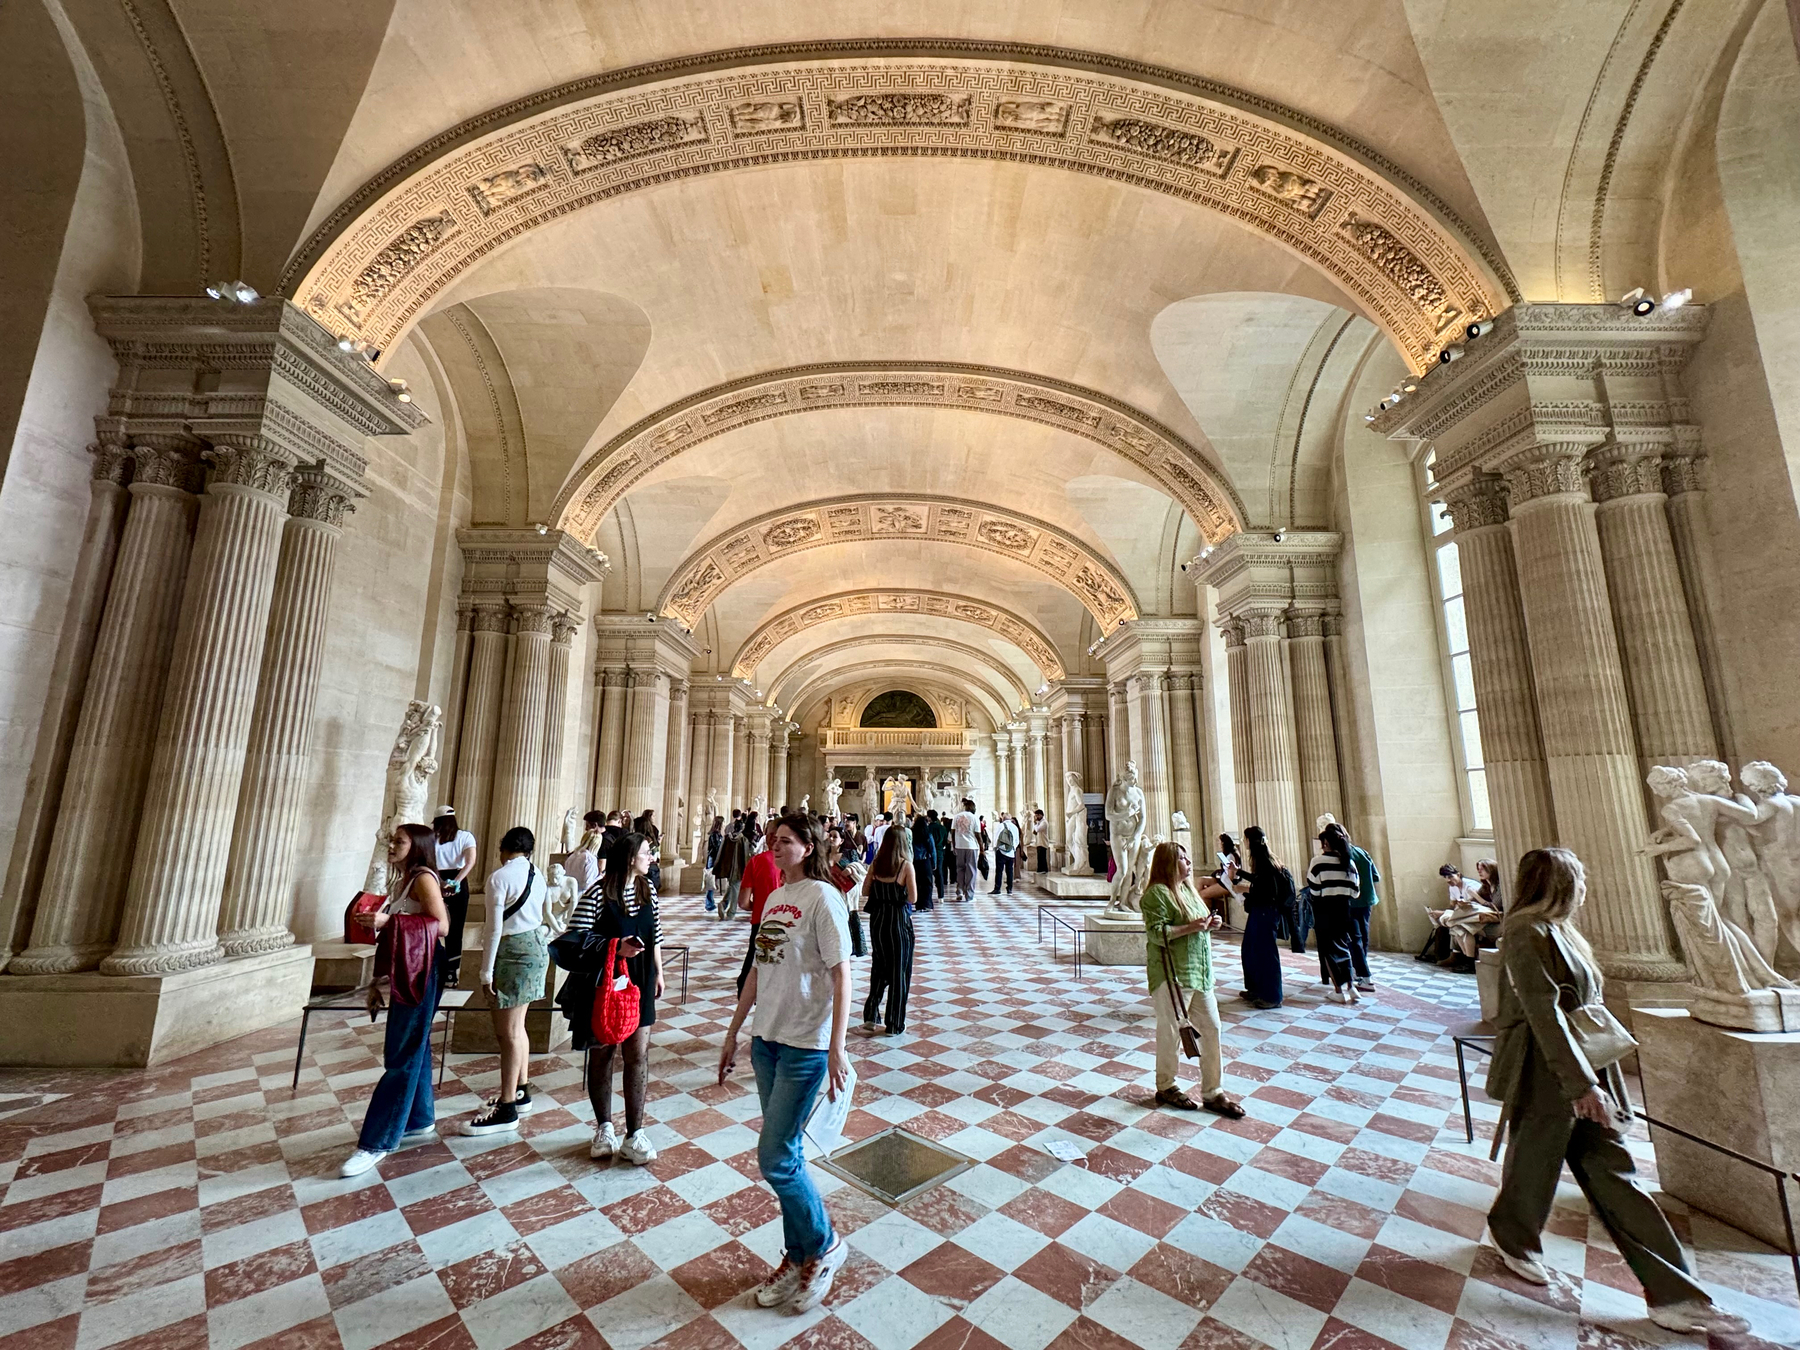 Interior of a museum gallery with classical architecture, featuring columns and sculptures, with visitors walking and observing the art.